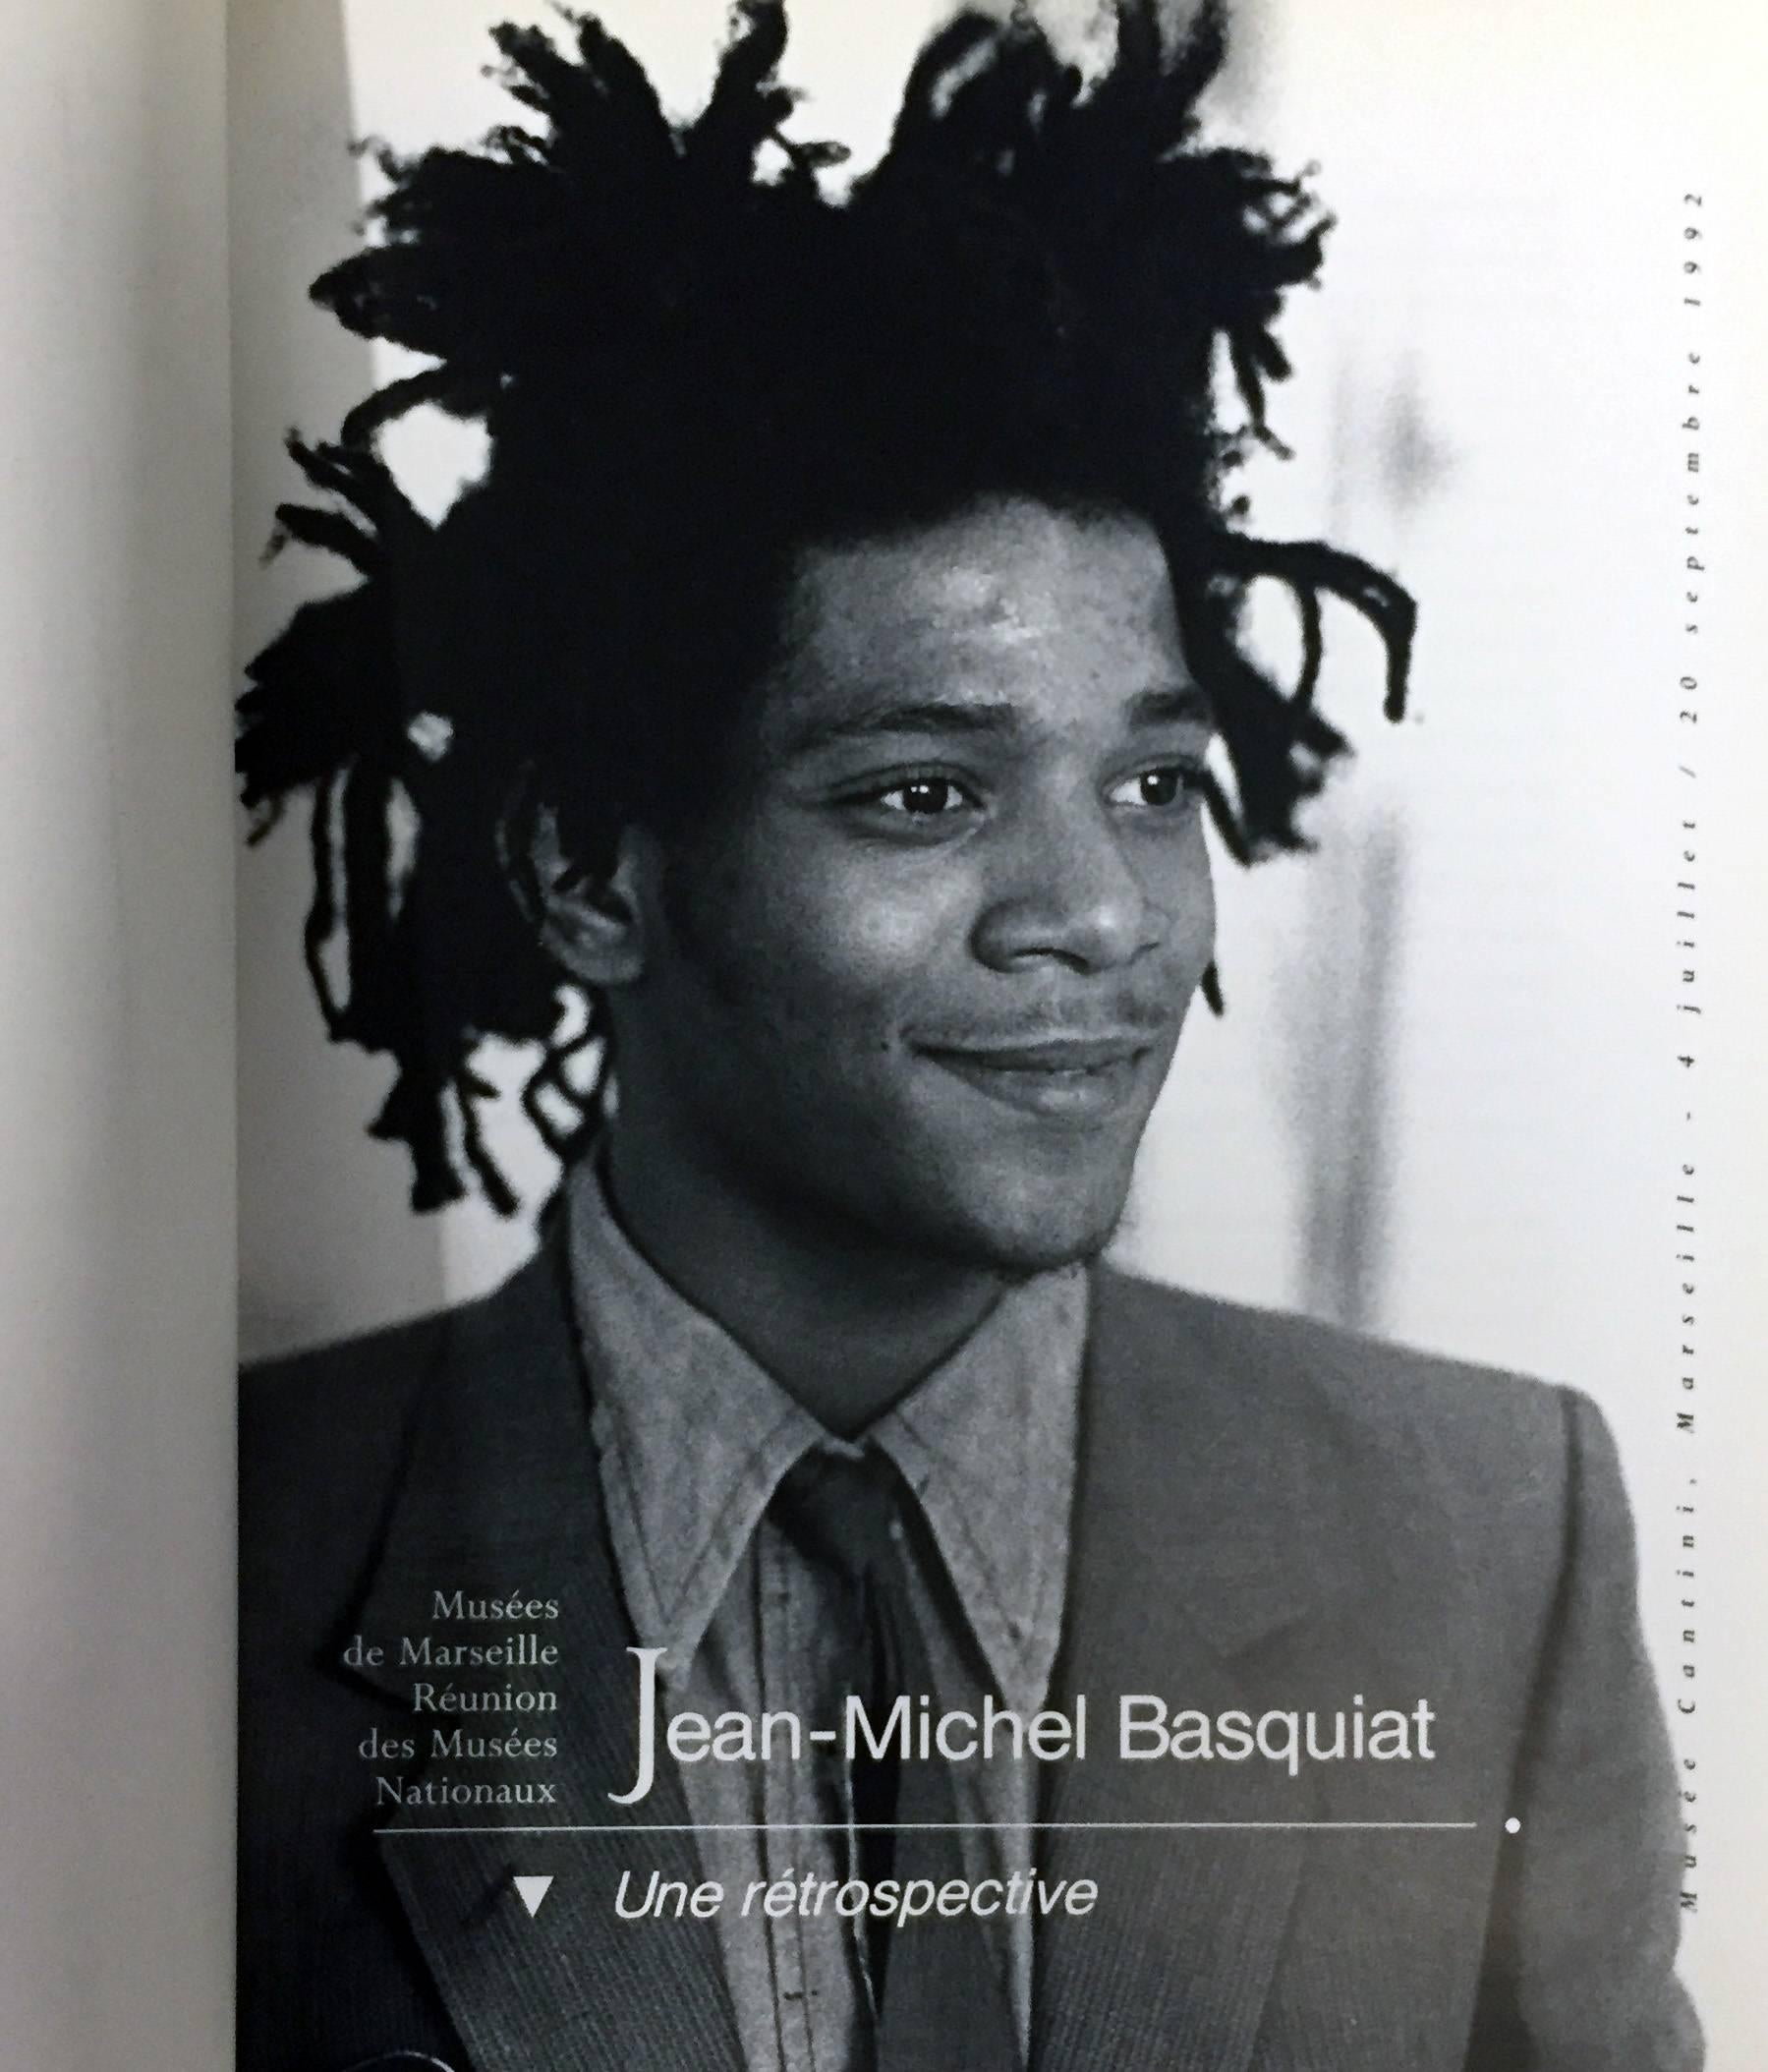 Jean-Michel Basquiat France 1992:
Original Exhibition Catalog, for Jean-Michel Basquiat – A Retrospective; Musée Cantini, Marseille, France, 1992.

Illustrated cover with flaps, 192 pages; approx 10 x 12 inches (30 x 23 cm).

Approximately 65 color